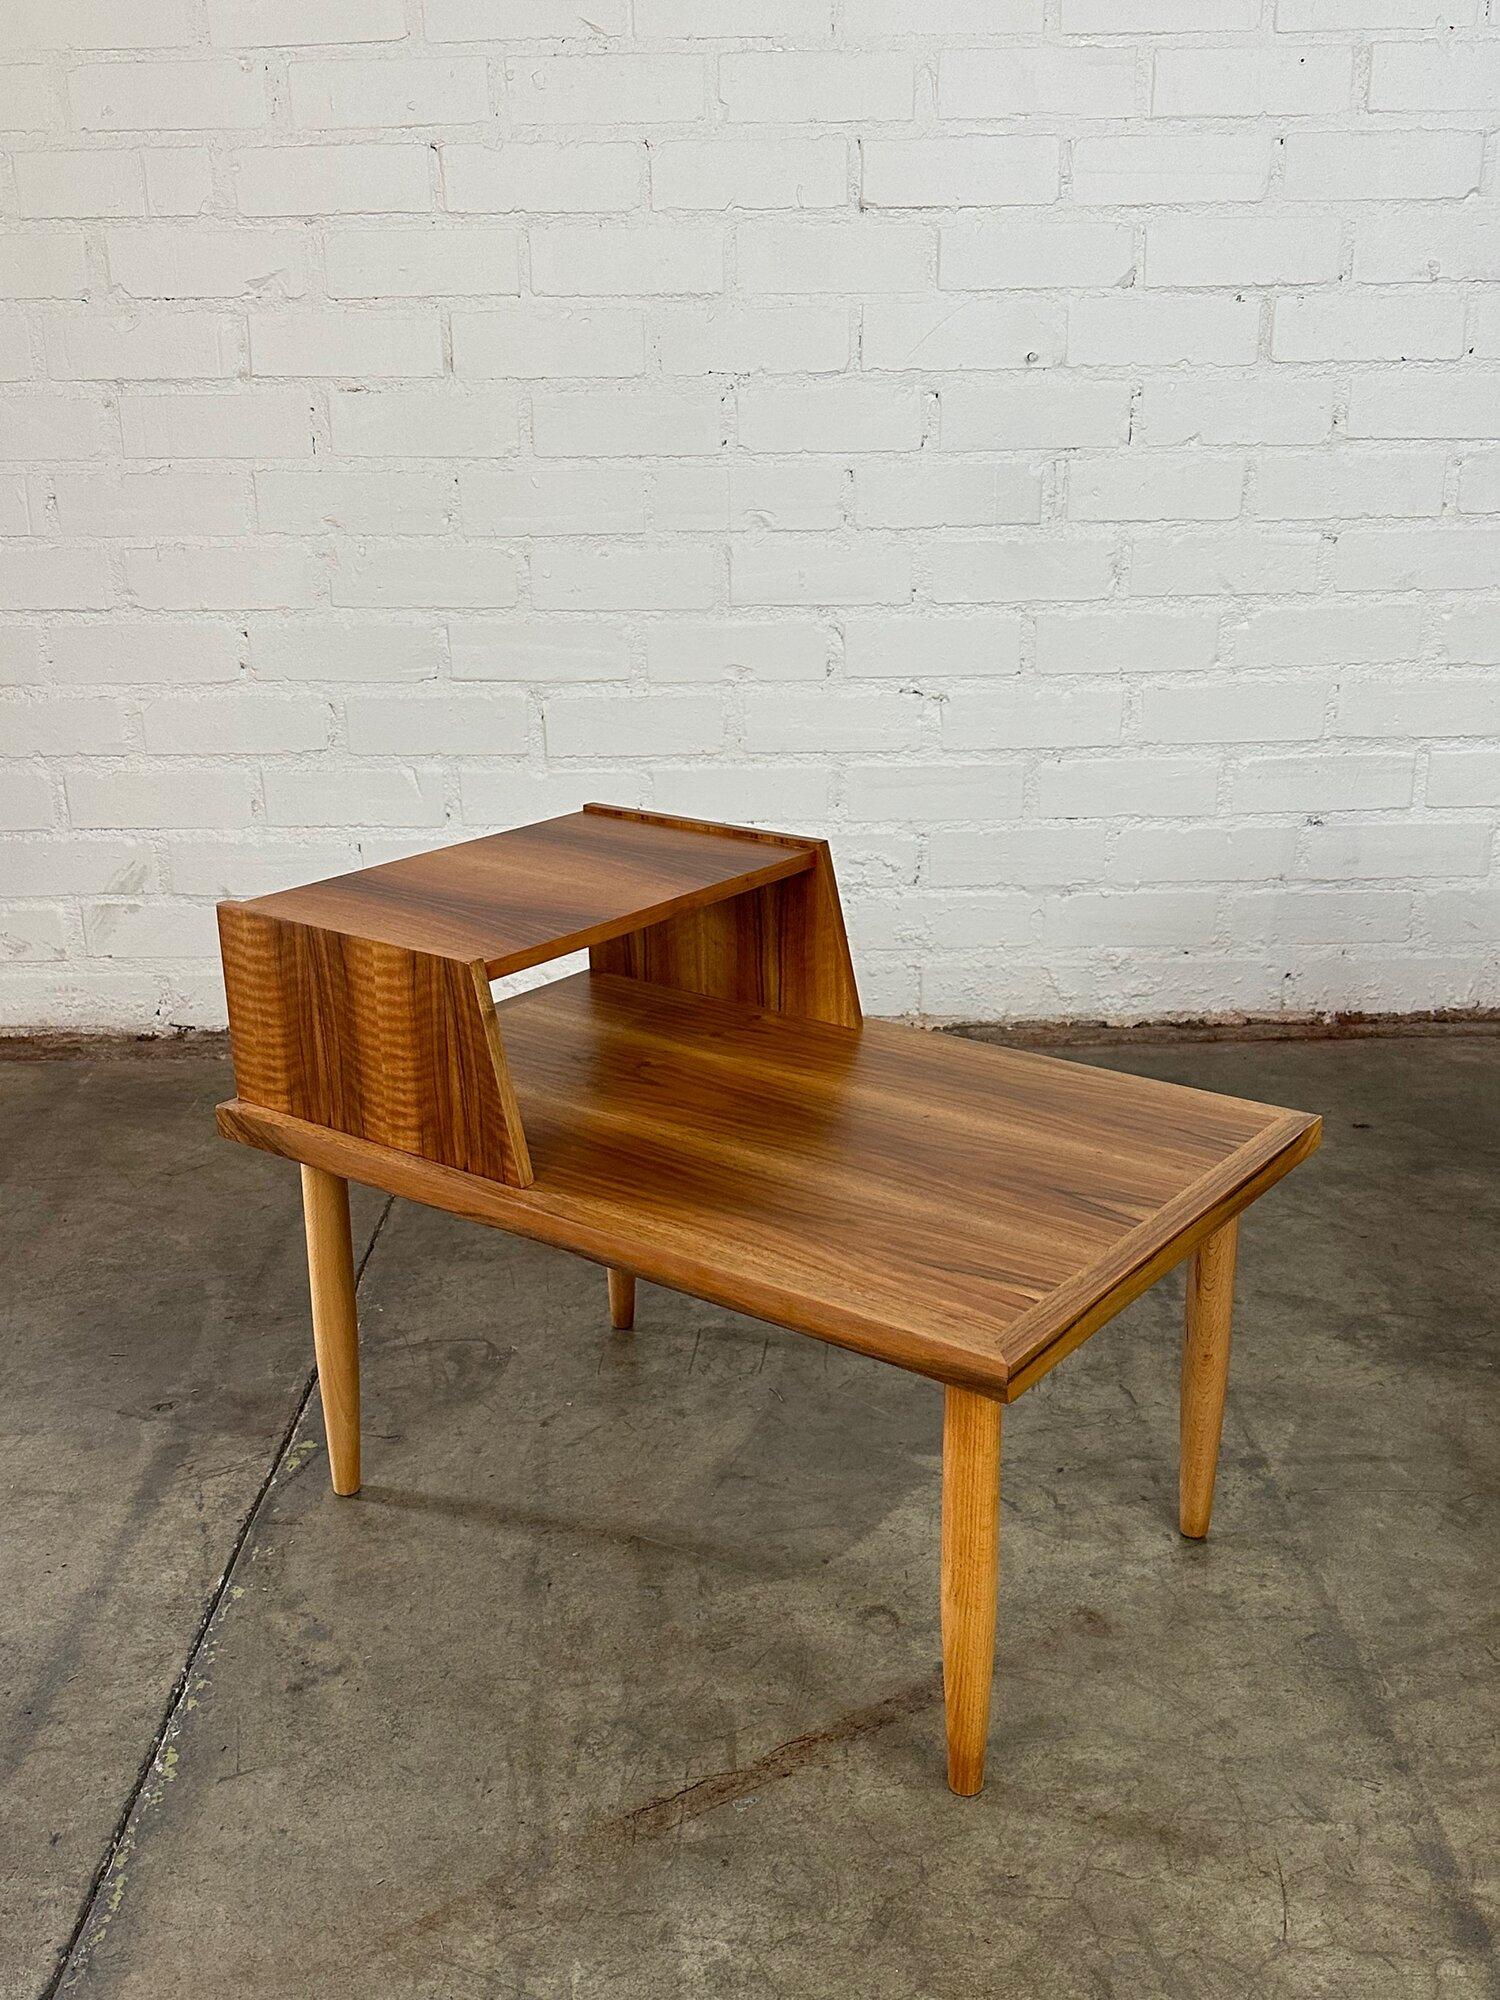 W30 D20 H22

Pair of fully restored mid century side tables in structurally sound condition. The pair has very nice rosewood veneer encased in walnut trim. Price is for the pair.